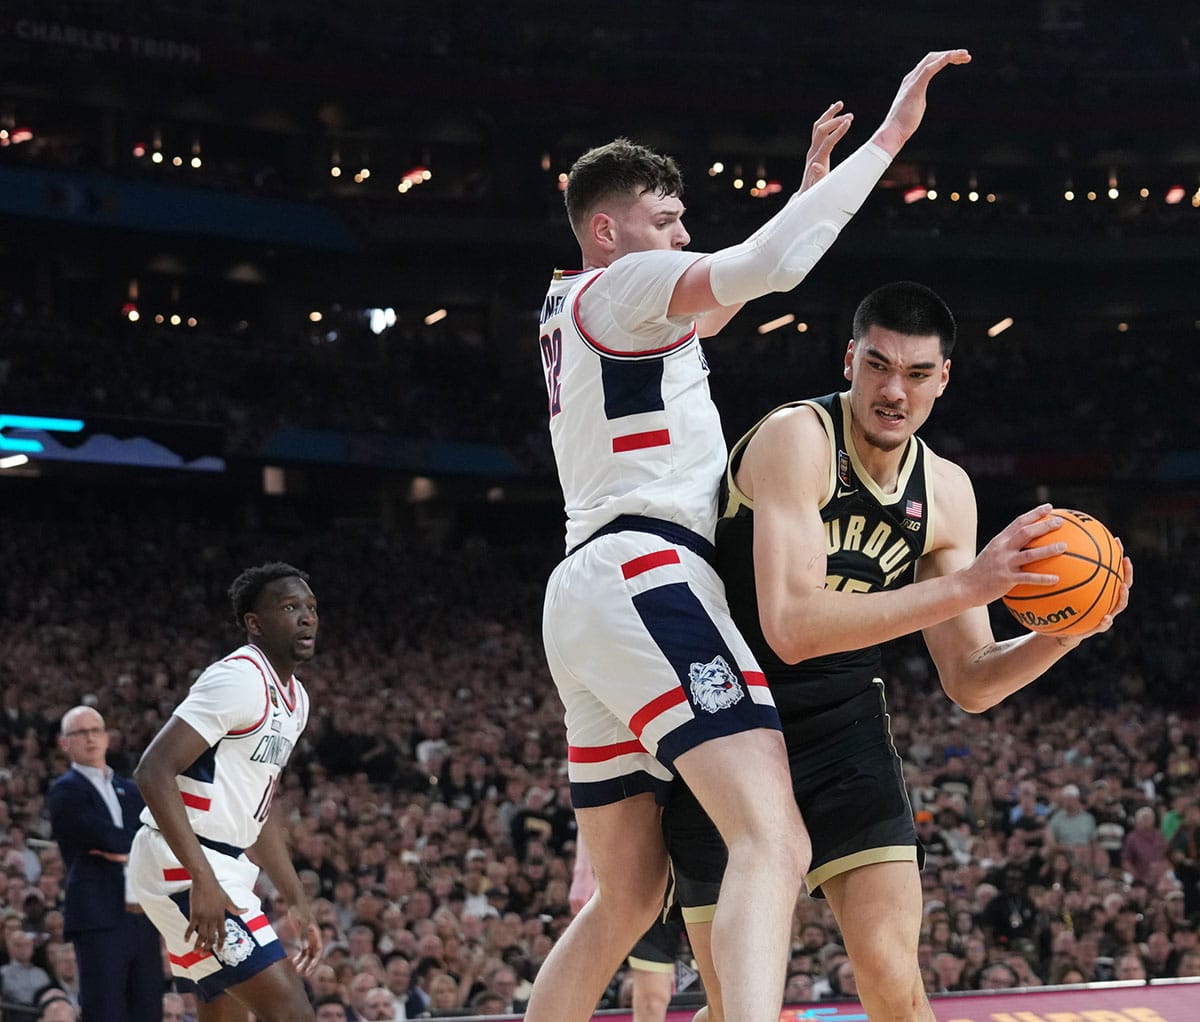 Connecticut Huskies center Donovan Clingan (32) guards Purdue Boilermakers center Zach Edey (15) during the Men's NCAA national championship game at State Farm Stadium